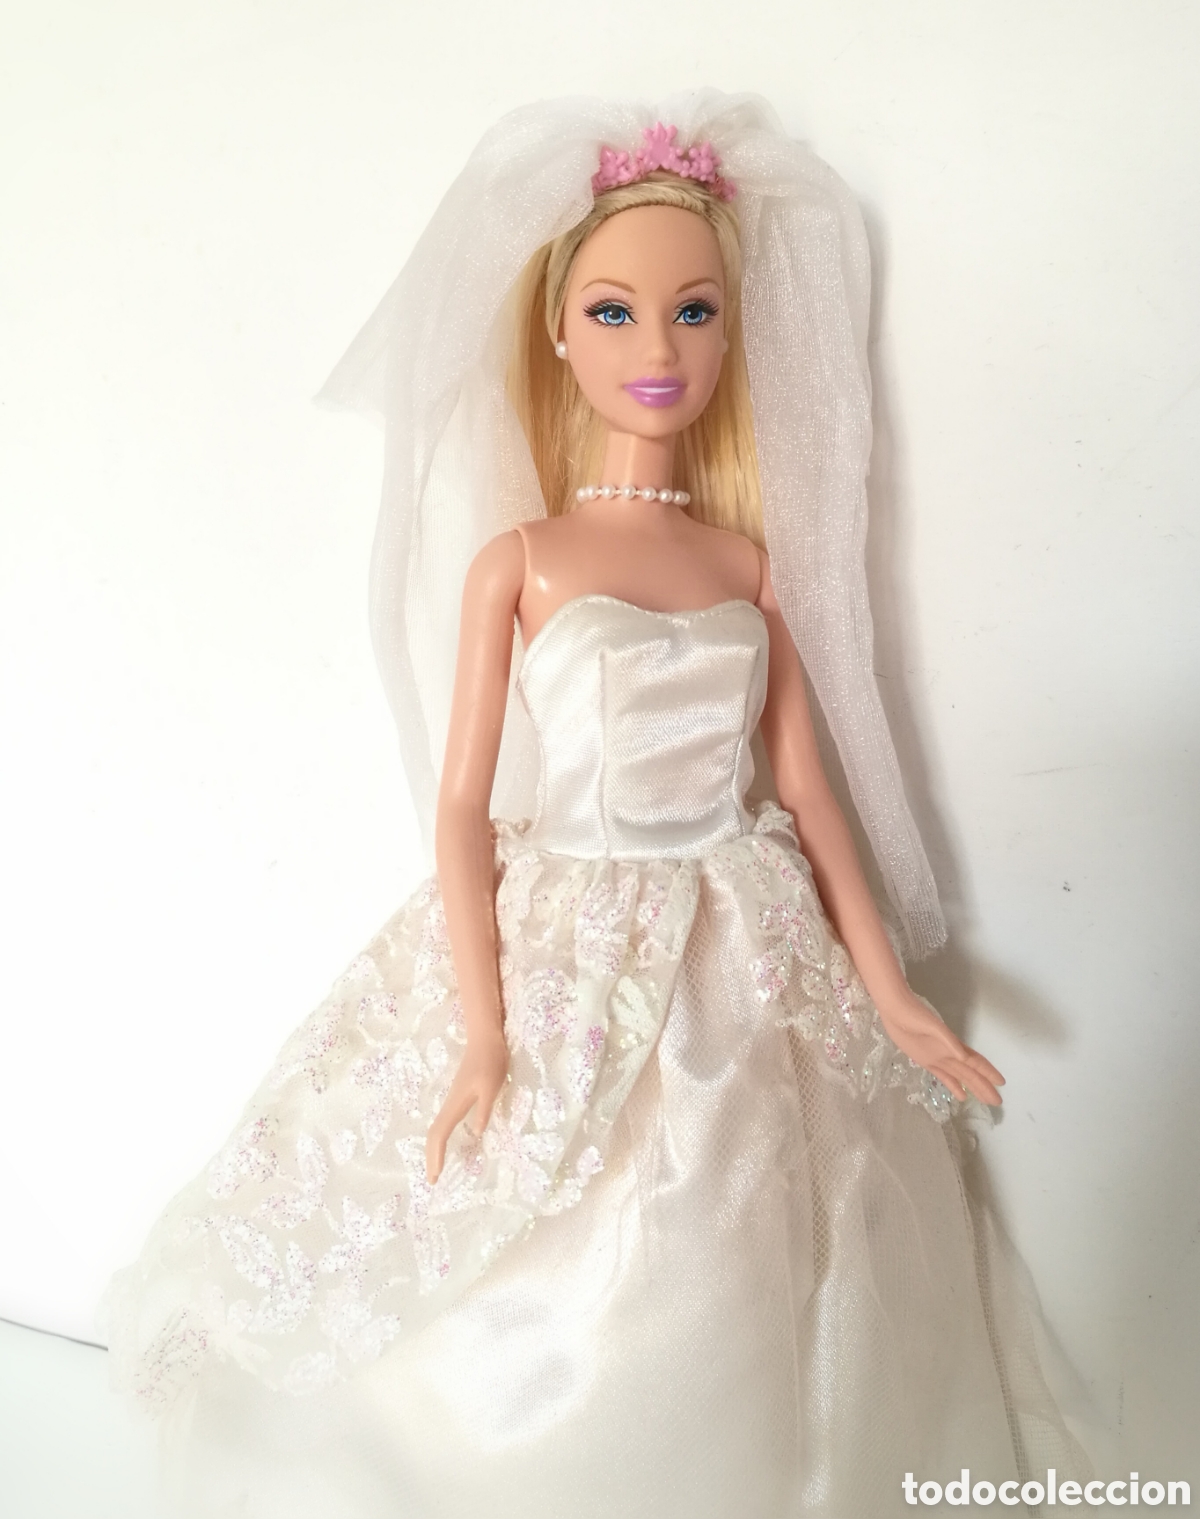 Barbie | Toys | Vintage Wedding Day Barbie Still In Box With Wedding Ring  Dress And Bouquet | Poshmark